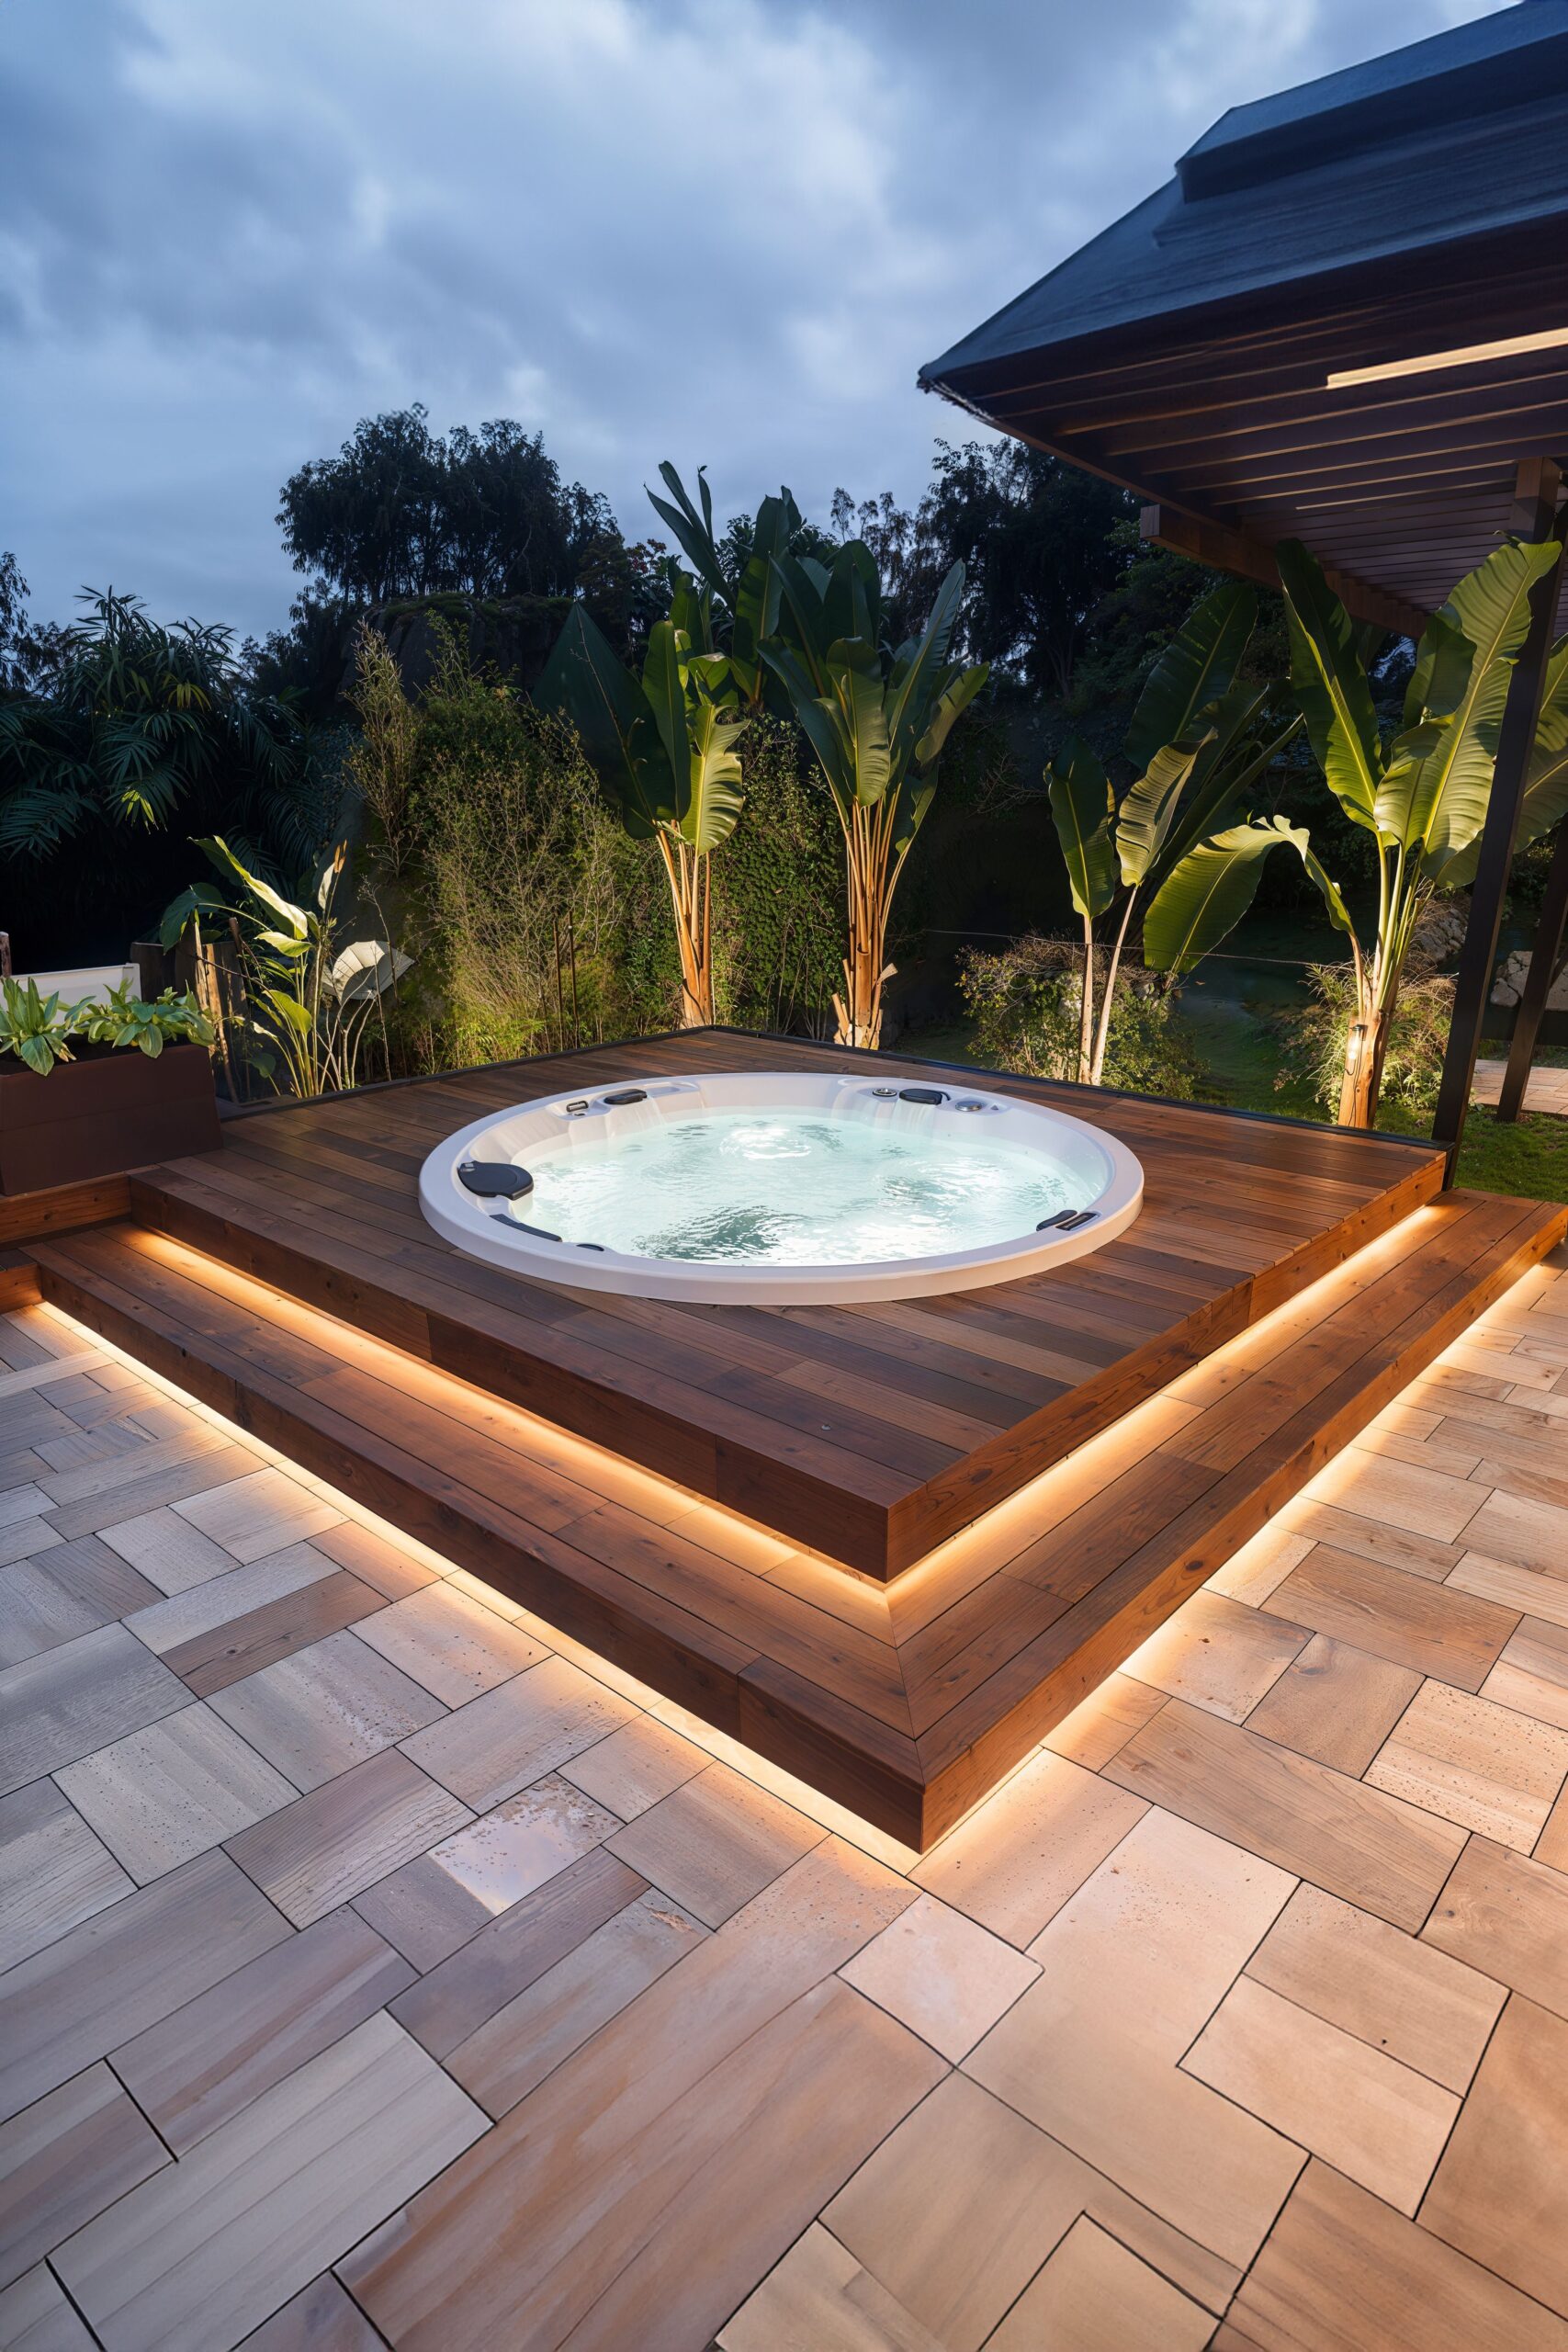 Creative Ways to Transform Your Backyard with a Hot Tub